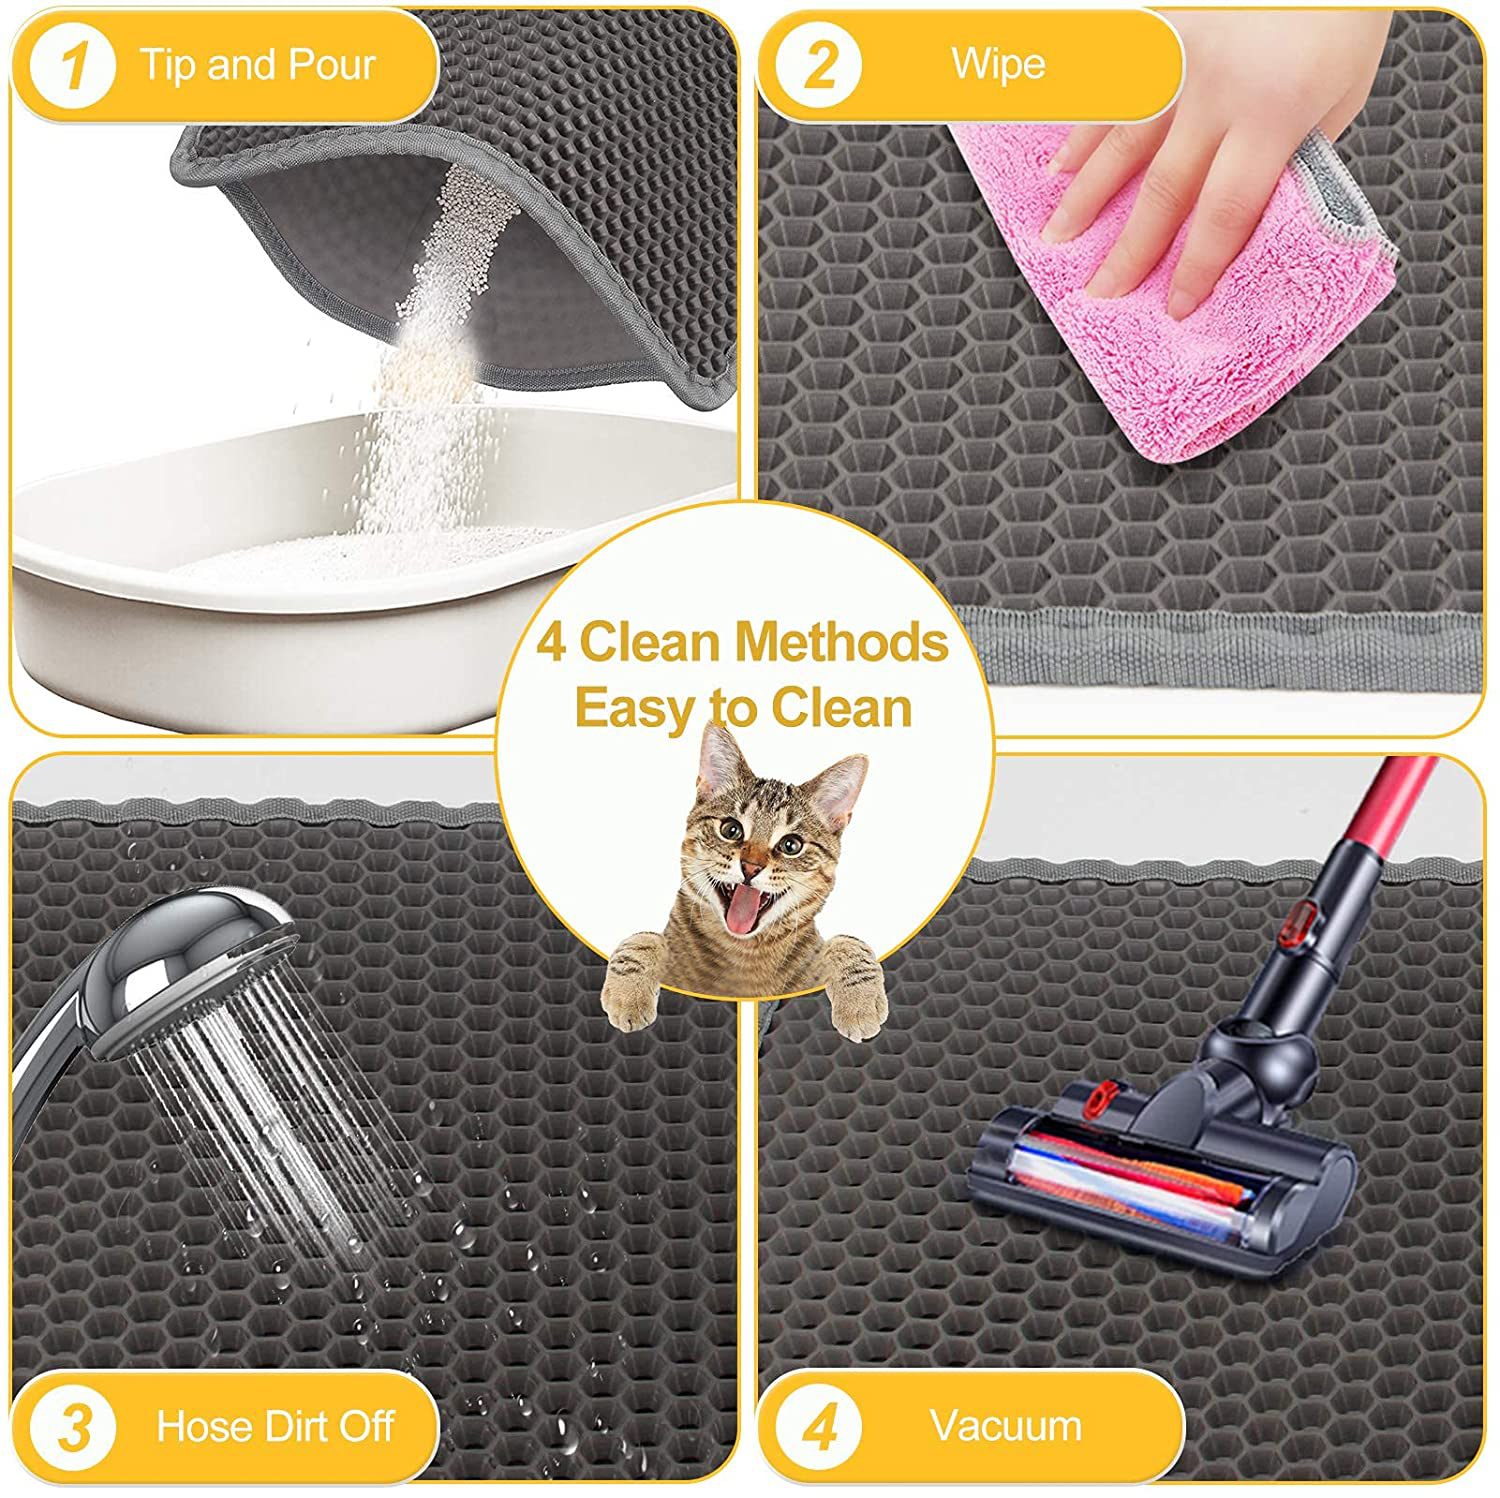 Letoo Cat Litter Mat Trapping for Litter Box, No-Toxic & Super Size, Urine & Waterproof, Honeycomb Double Layer anti Tracking Kitty Mats, No Phthalate, Washable Easy Clean Animals & Pet Supplies > Pet Supplies > Cat Supplies > Cat Litter Box Mats LeToo   